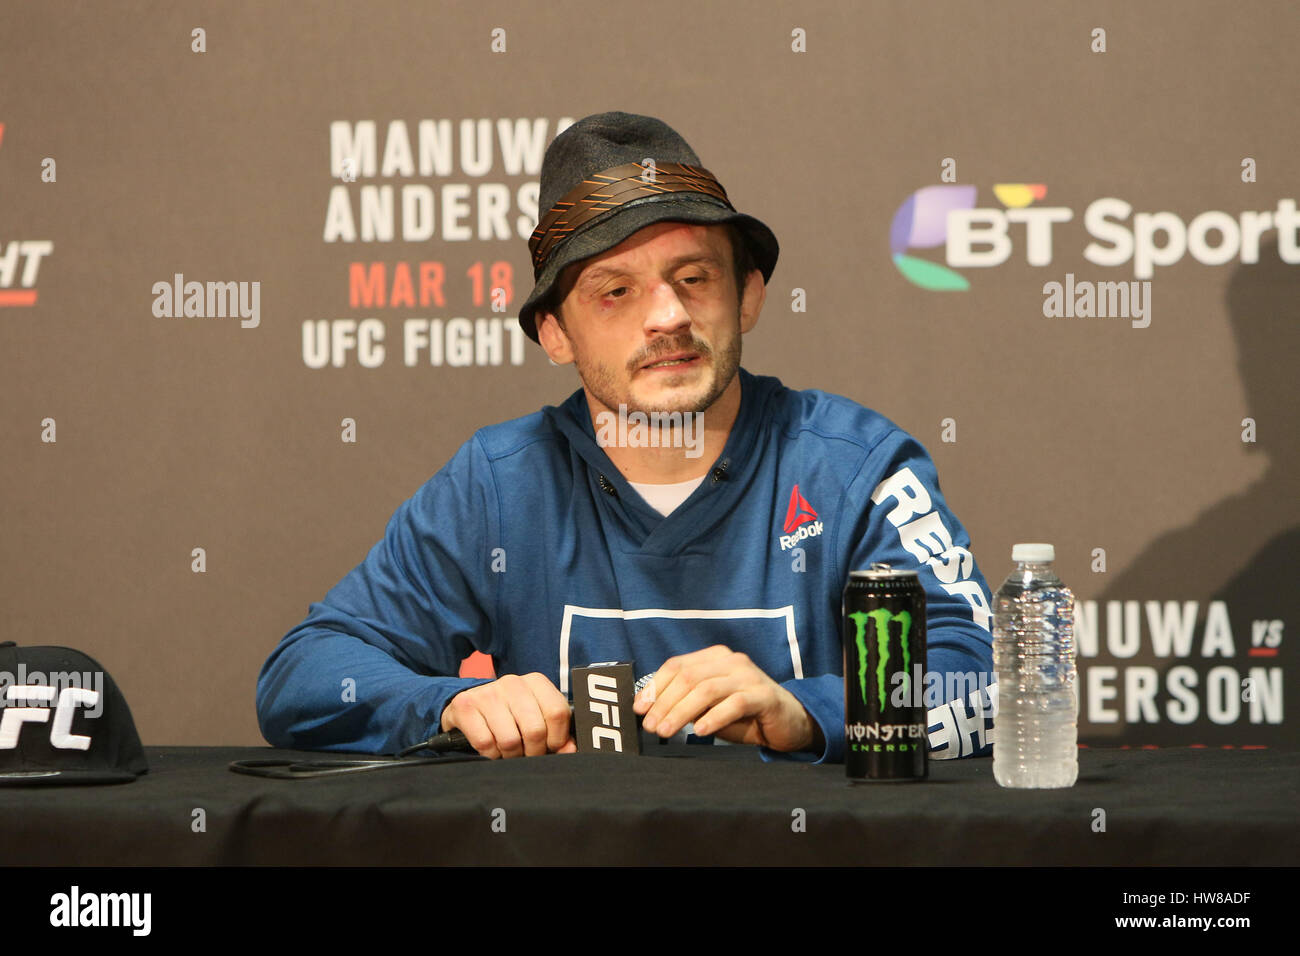 O2 Arena , London, England. 18 March 2017. Brad Pickett takes questions from media as he enters retirement in the post fight press conference  during UFC Fight Night 107: London  Credit: Dan Cooke/Alamy Live News Stock Photo